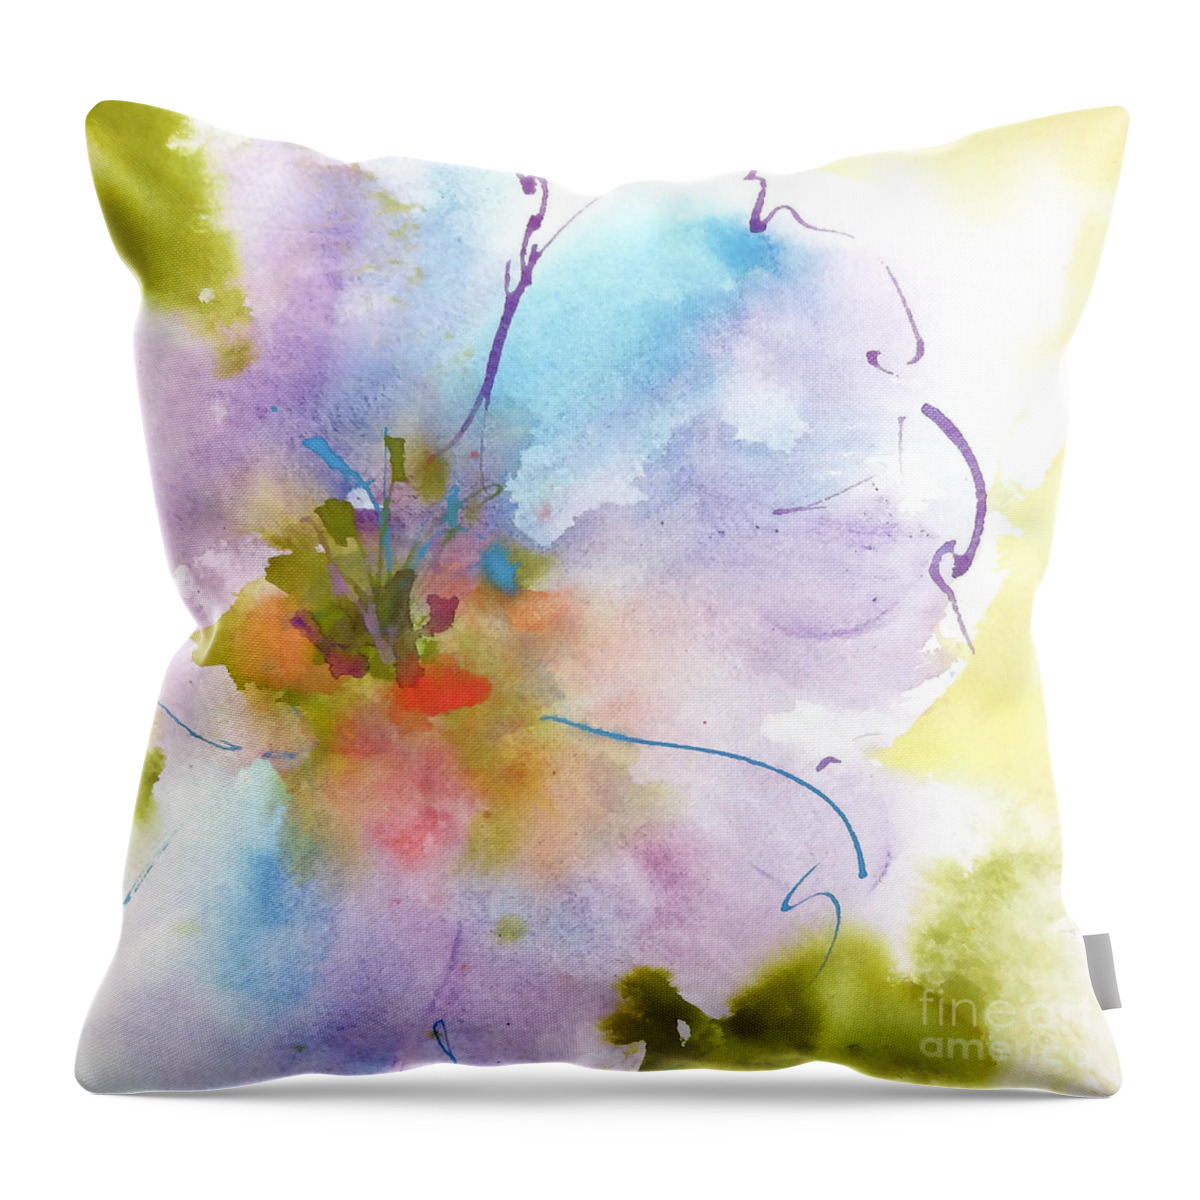 Original And Printed Watercolors Throw Pillow featuring the painting Flower Tint Poppy I by Chris Paschke